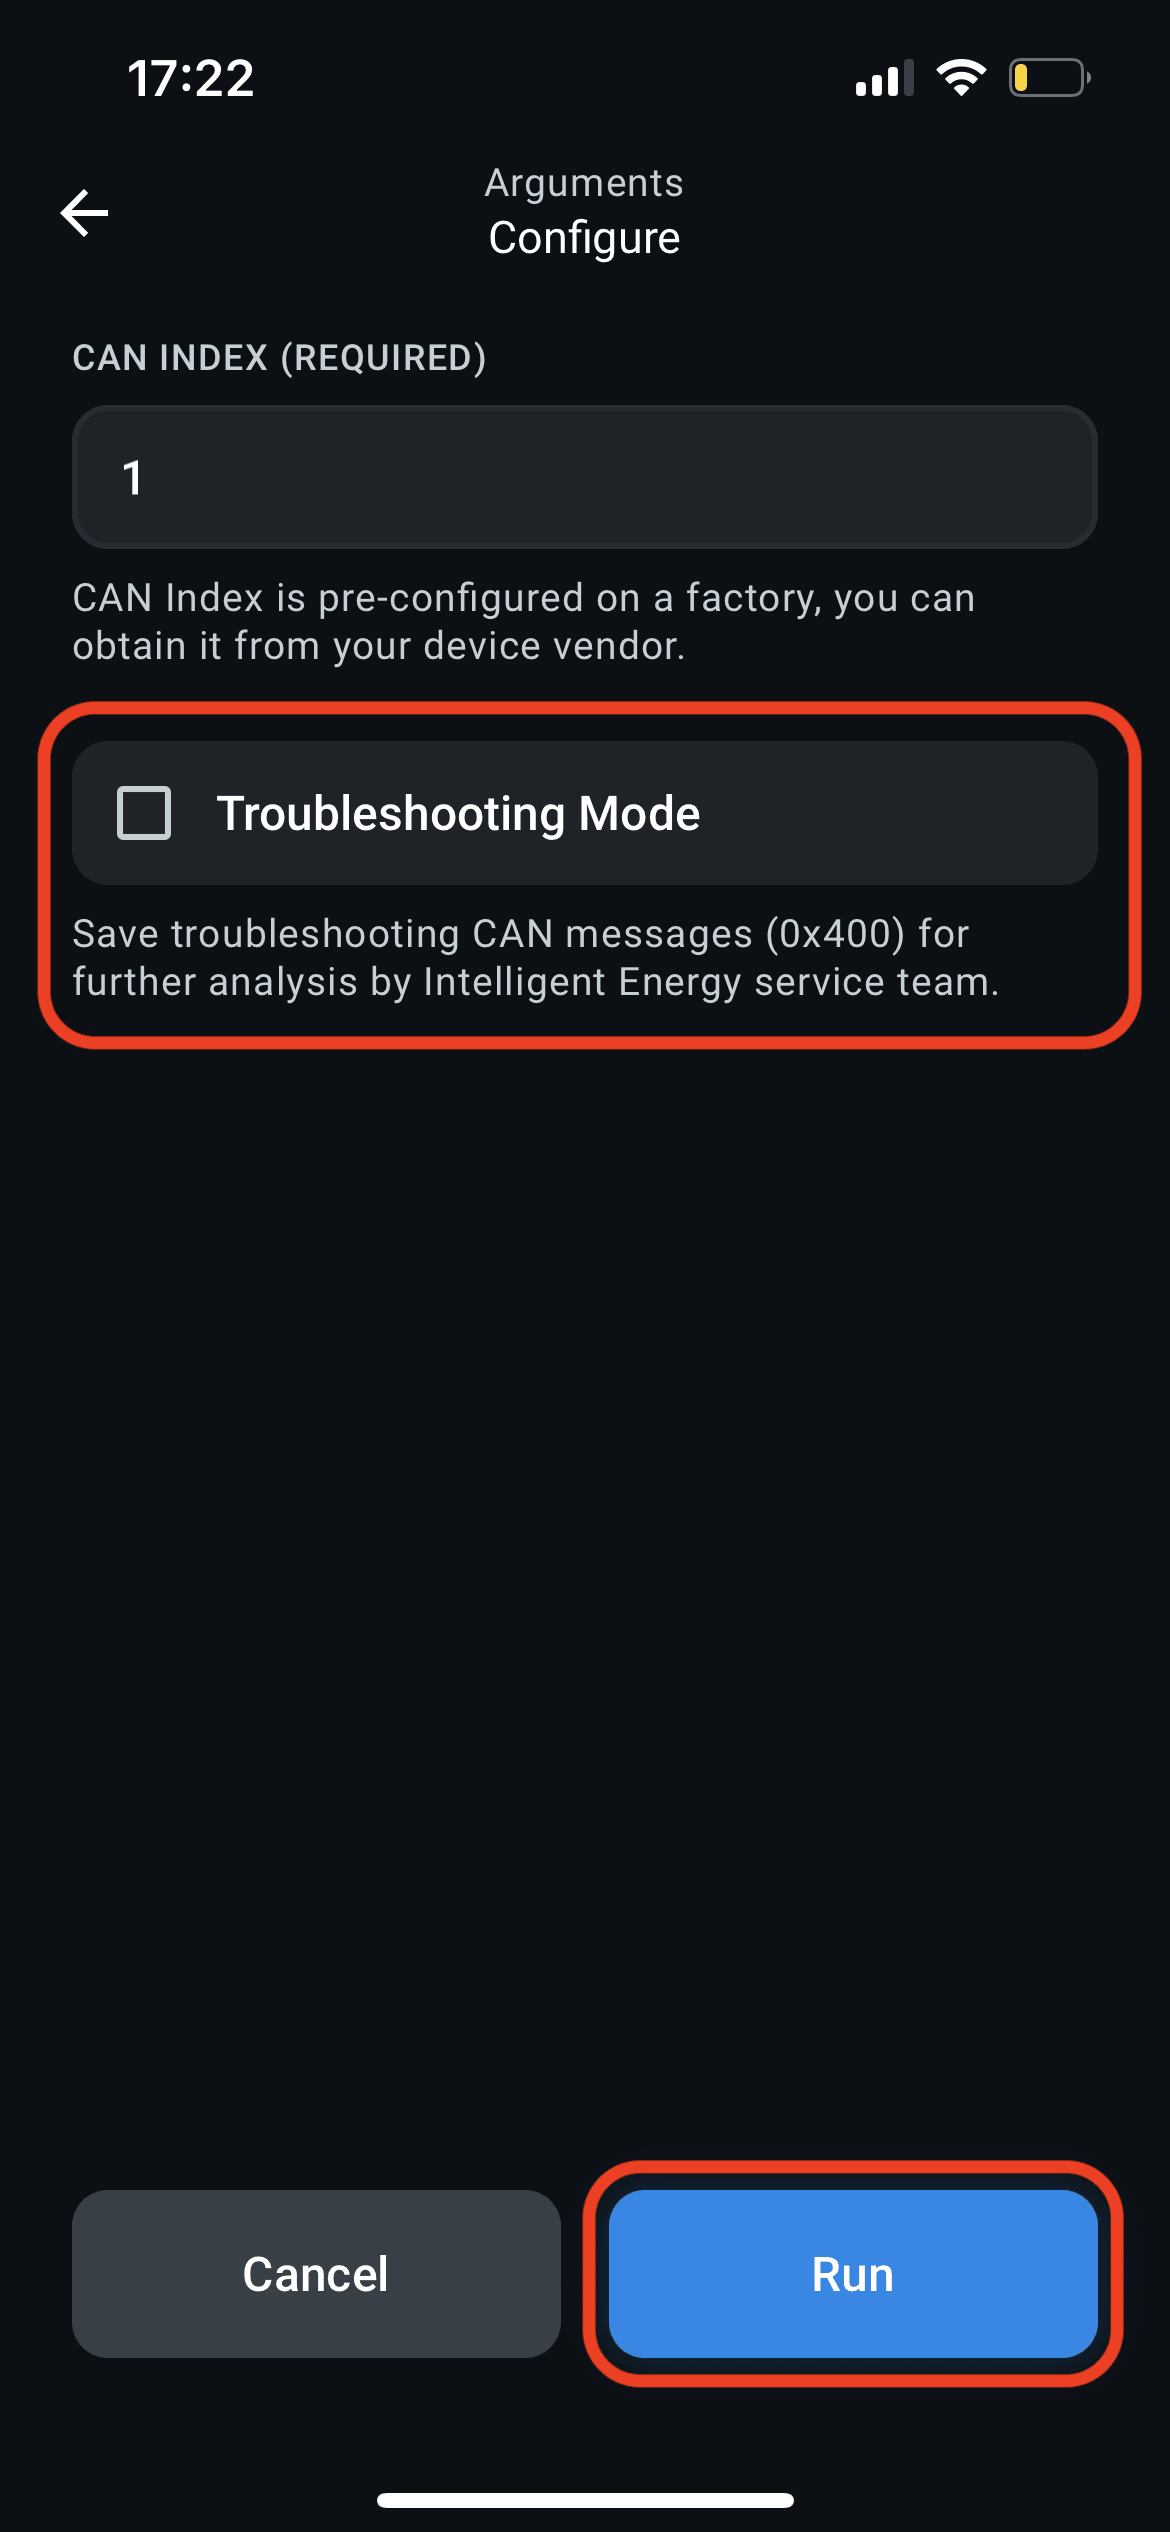 Enable Troubleshooting Mode and press Run.